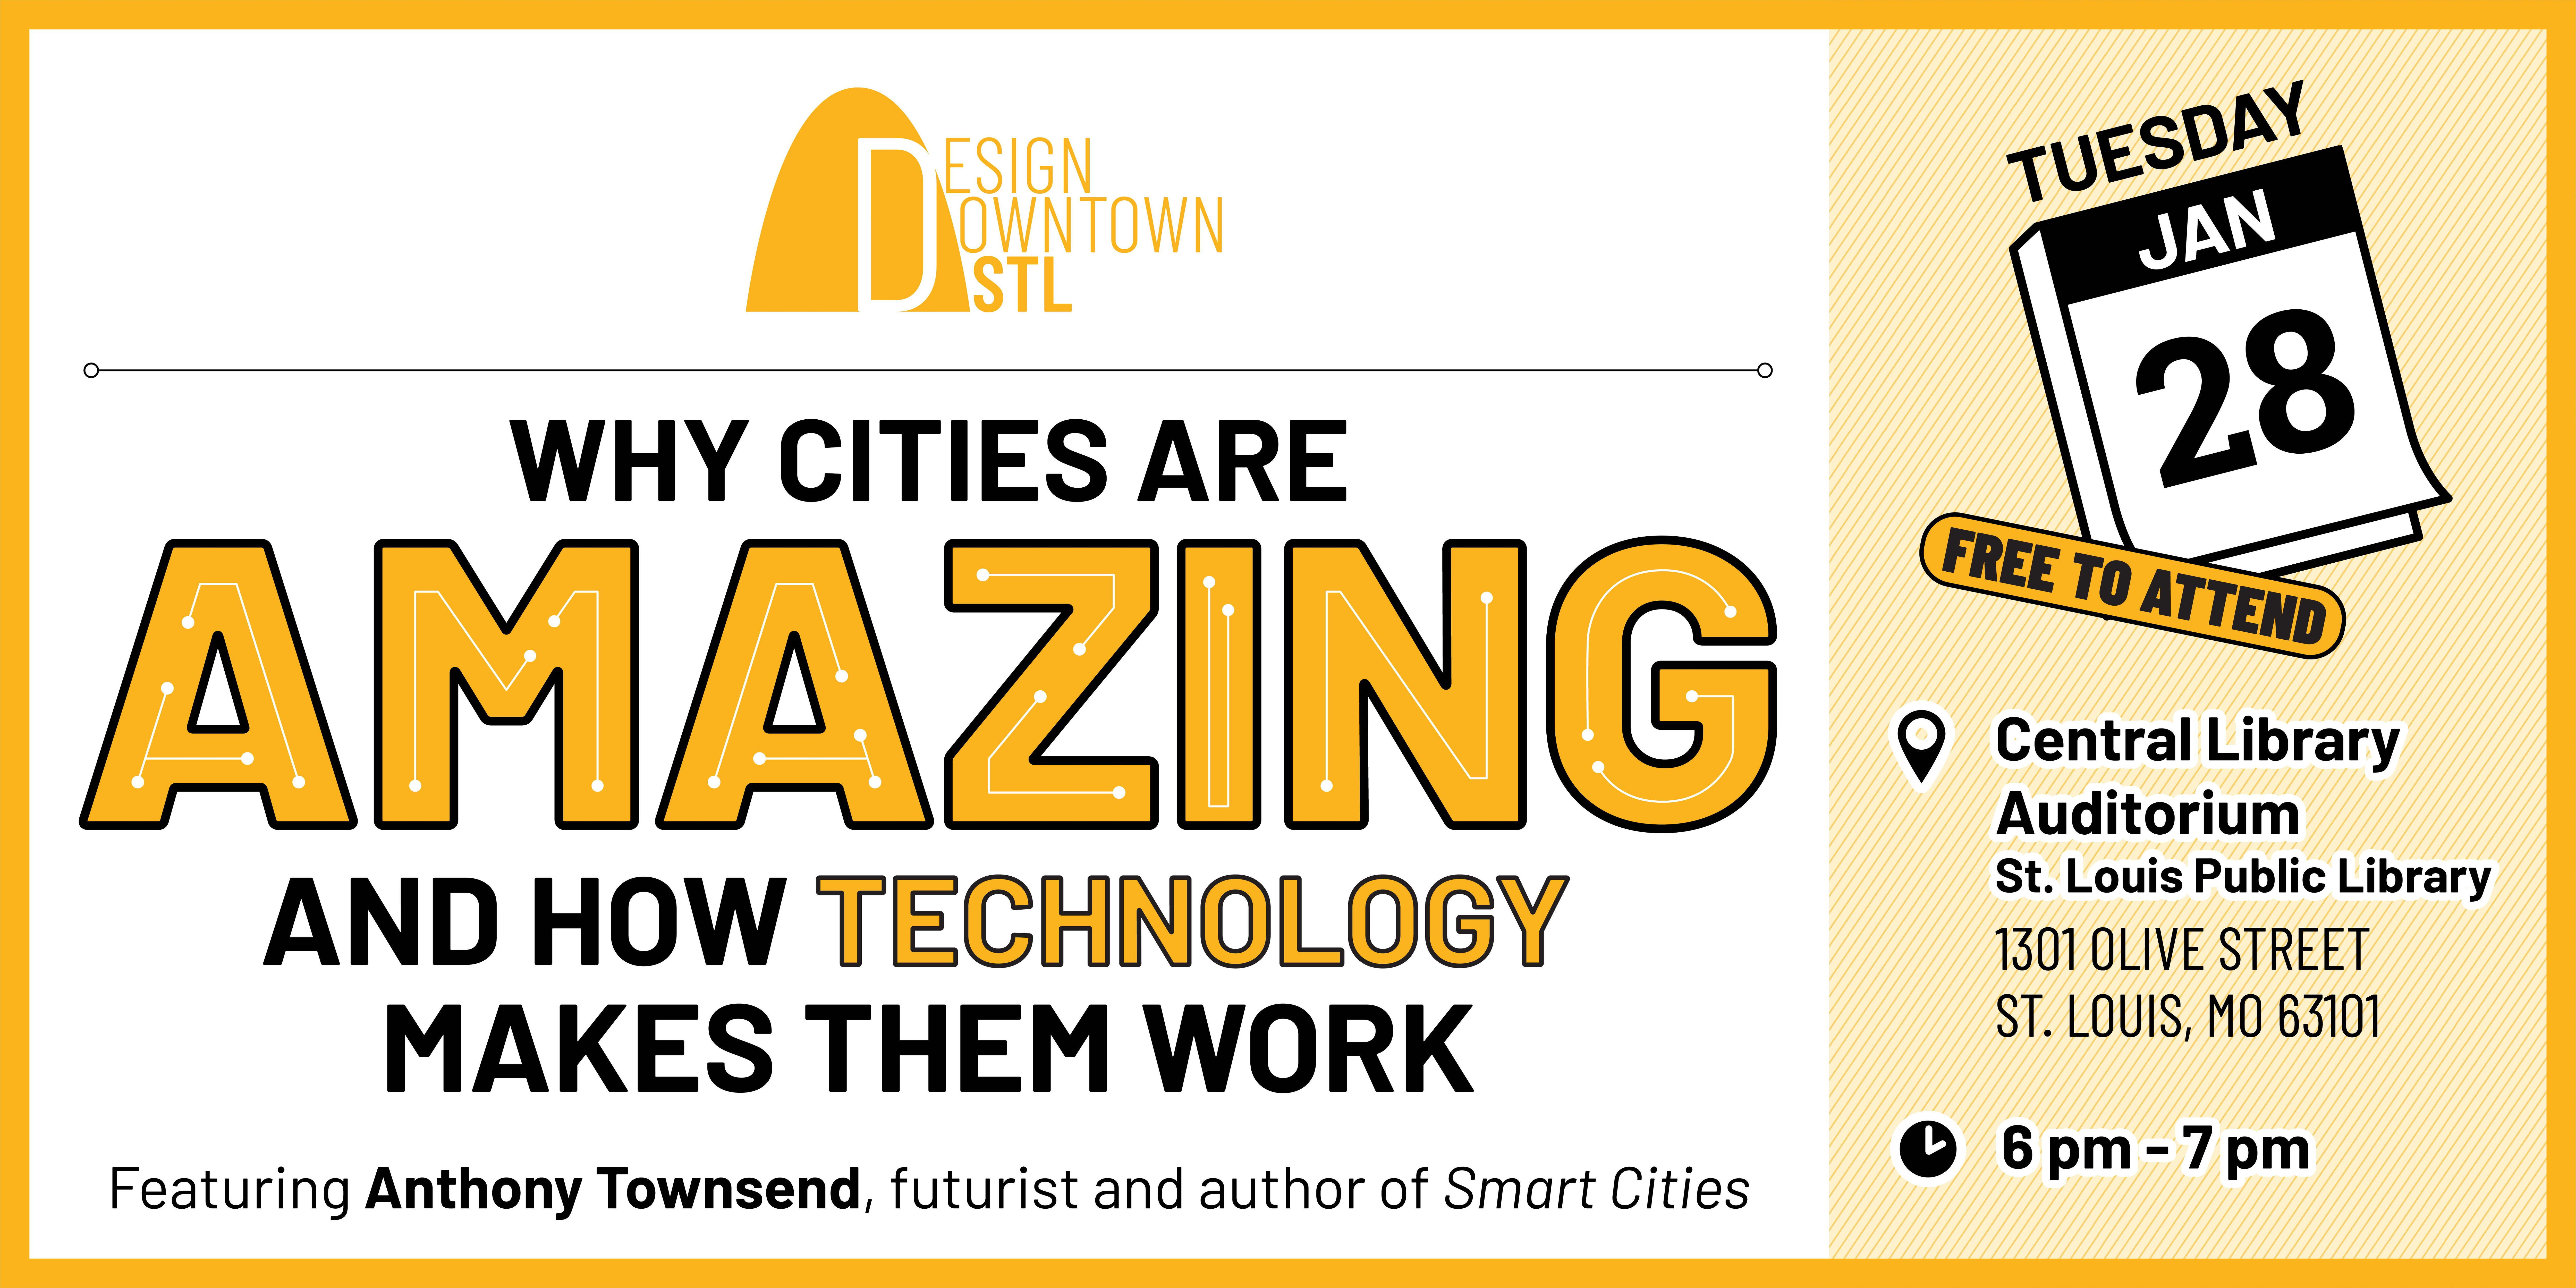 Why Cities Are Amazing And How Technology Makes Them Work